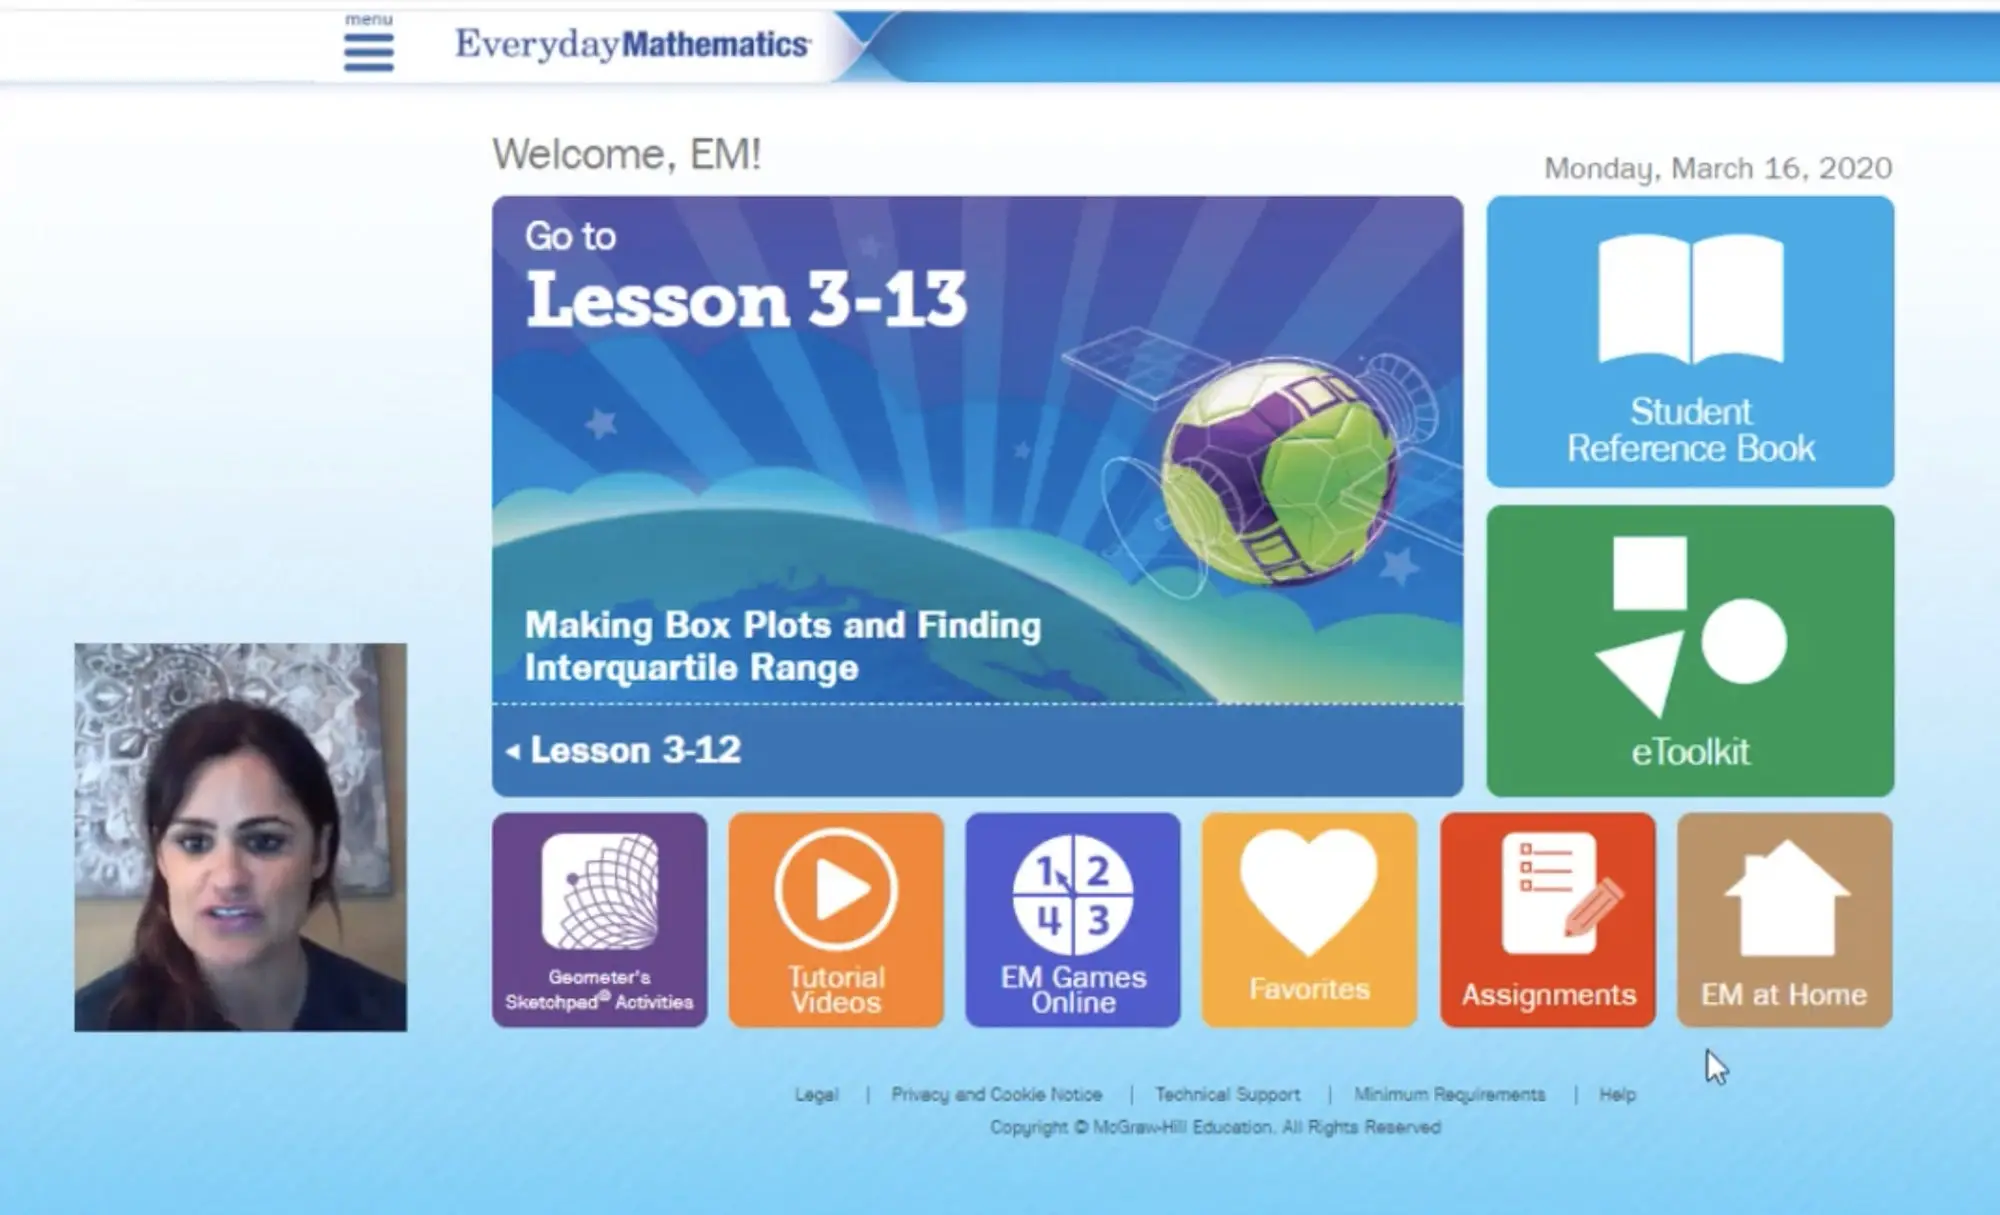 Screenshot of the Everyday Mathematics online learning portal